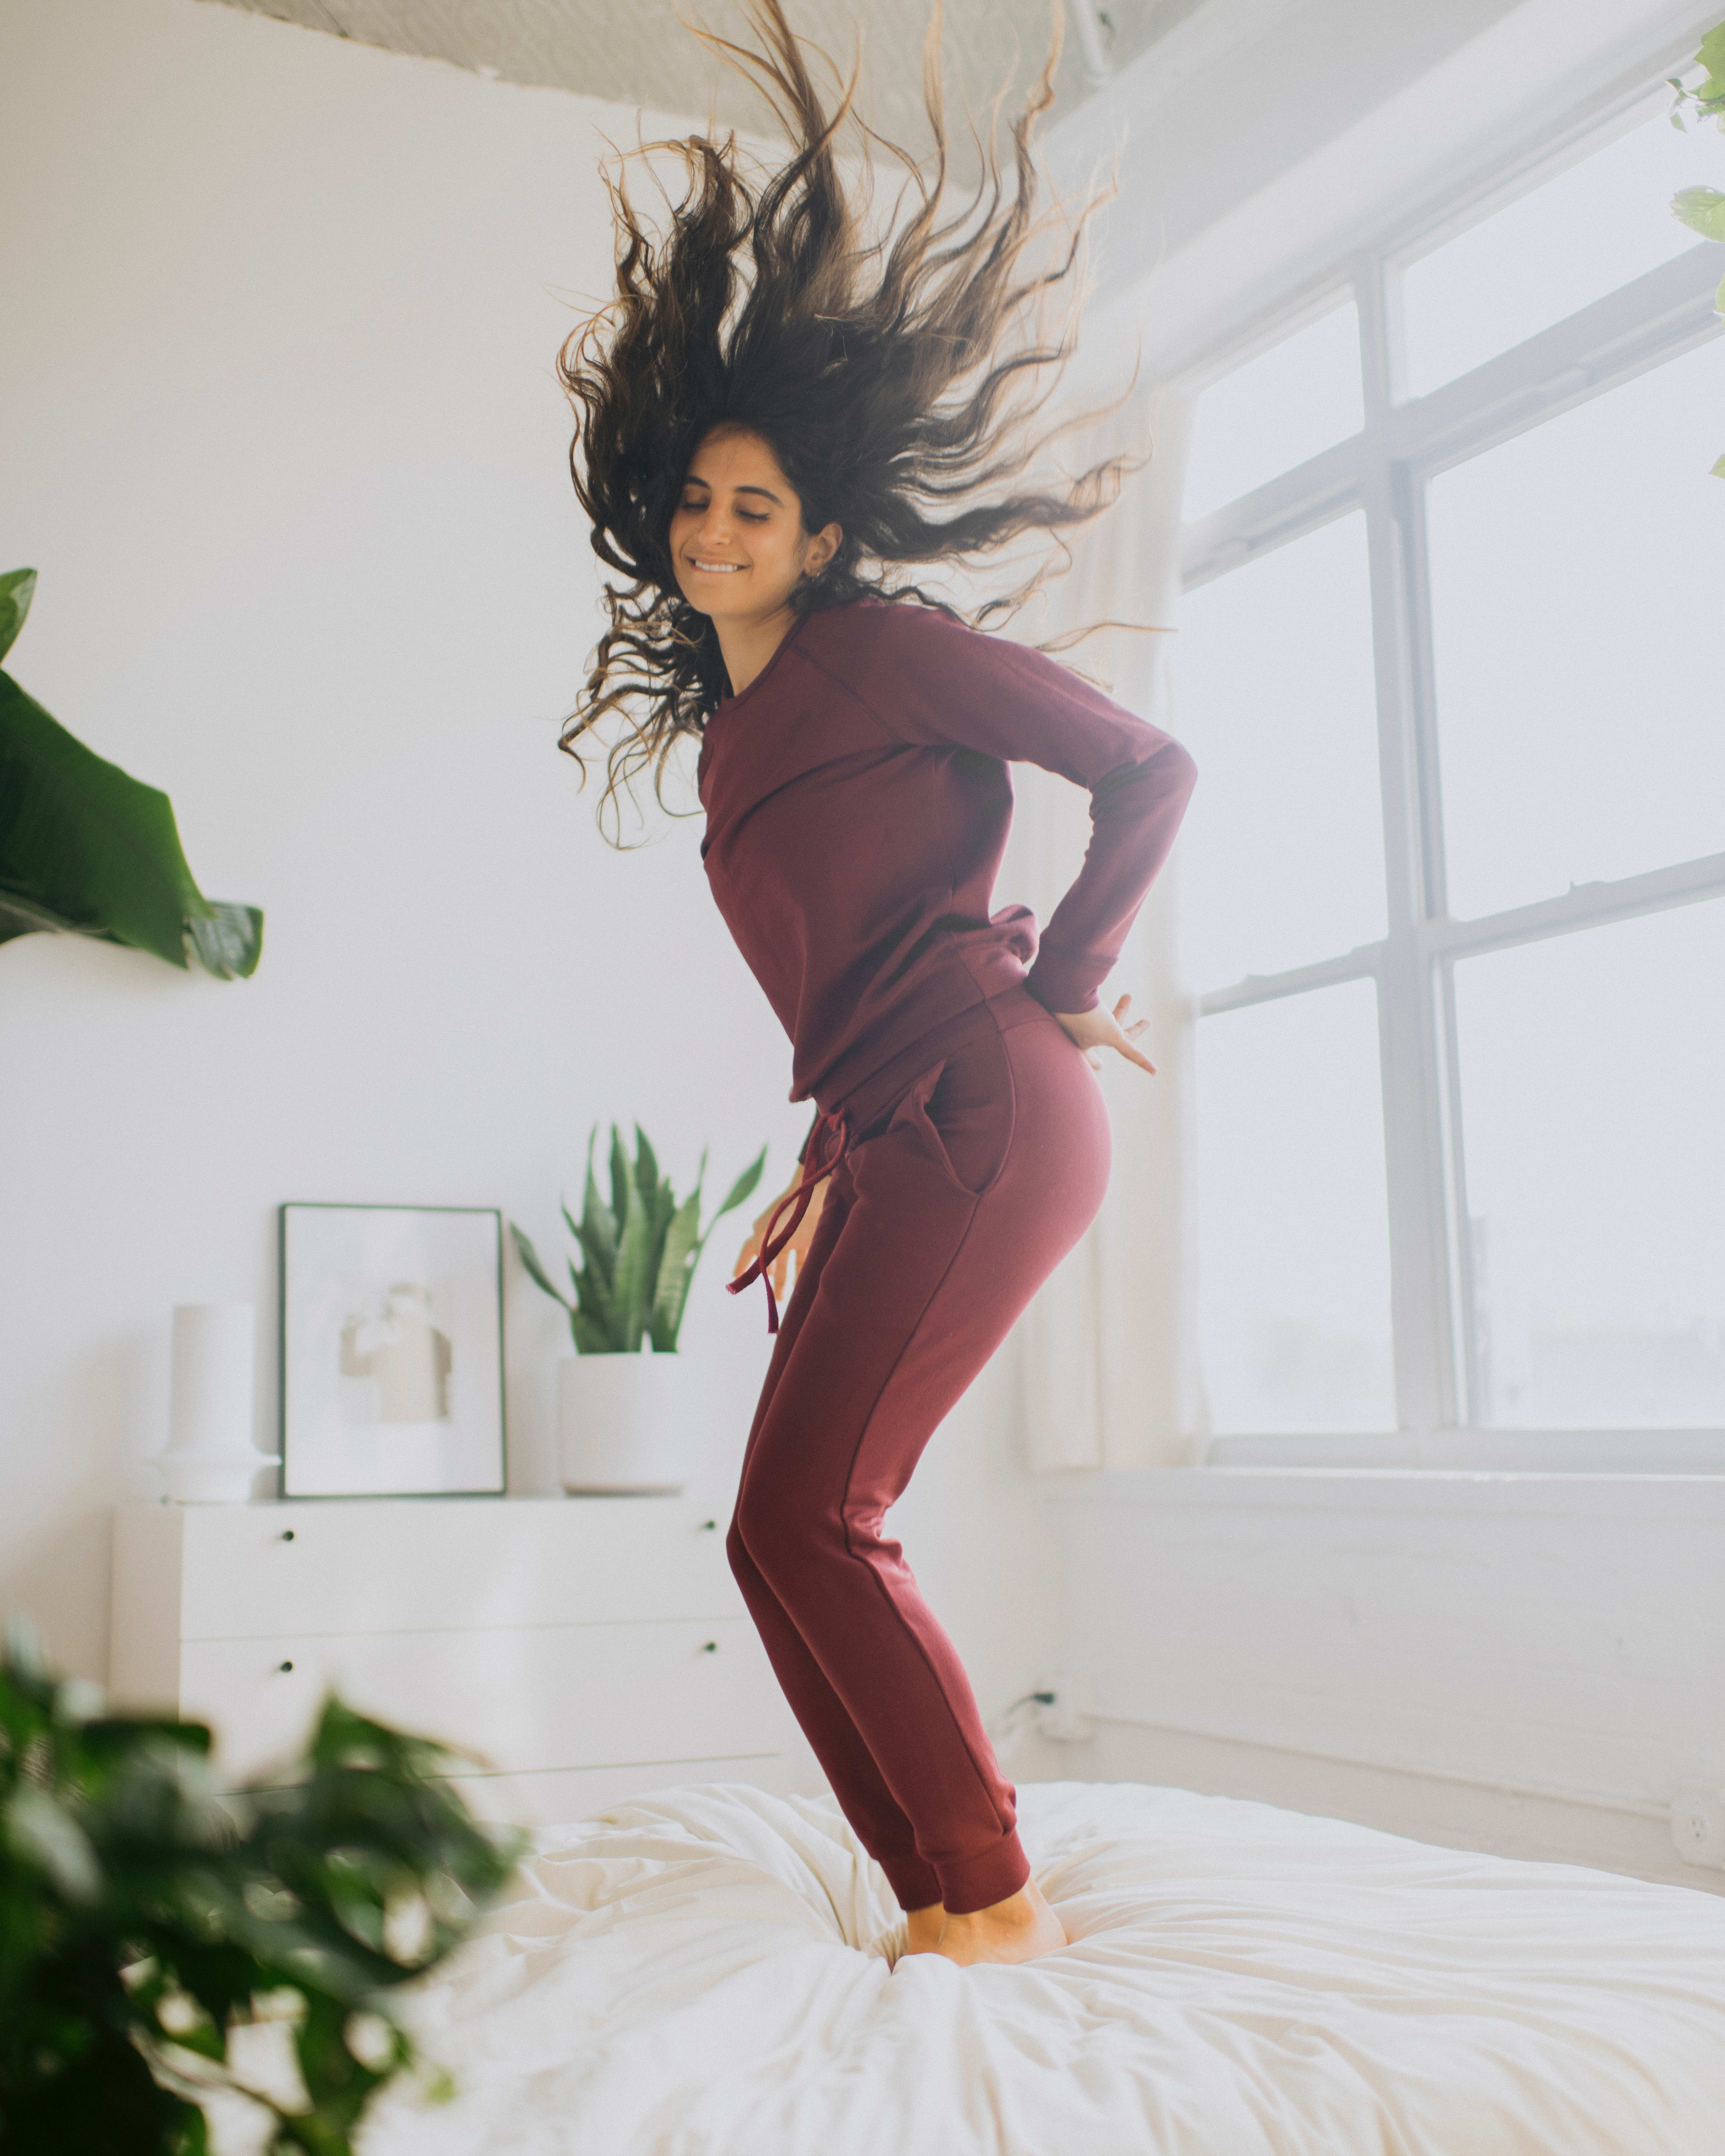 A fashion photoshoot of a woman jumping on a white bed with her hair in the air.